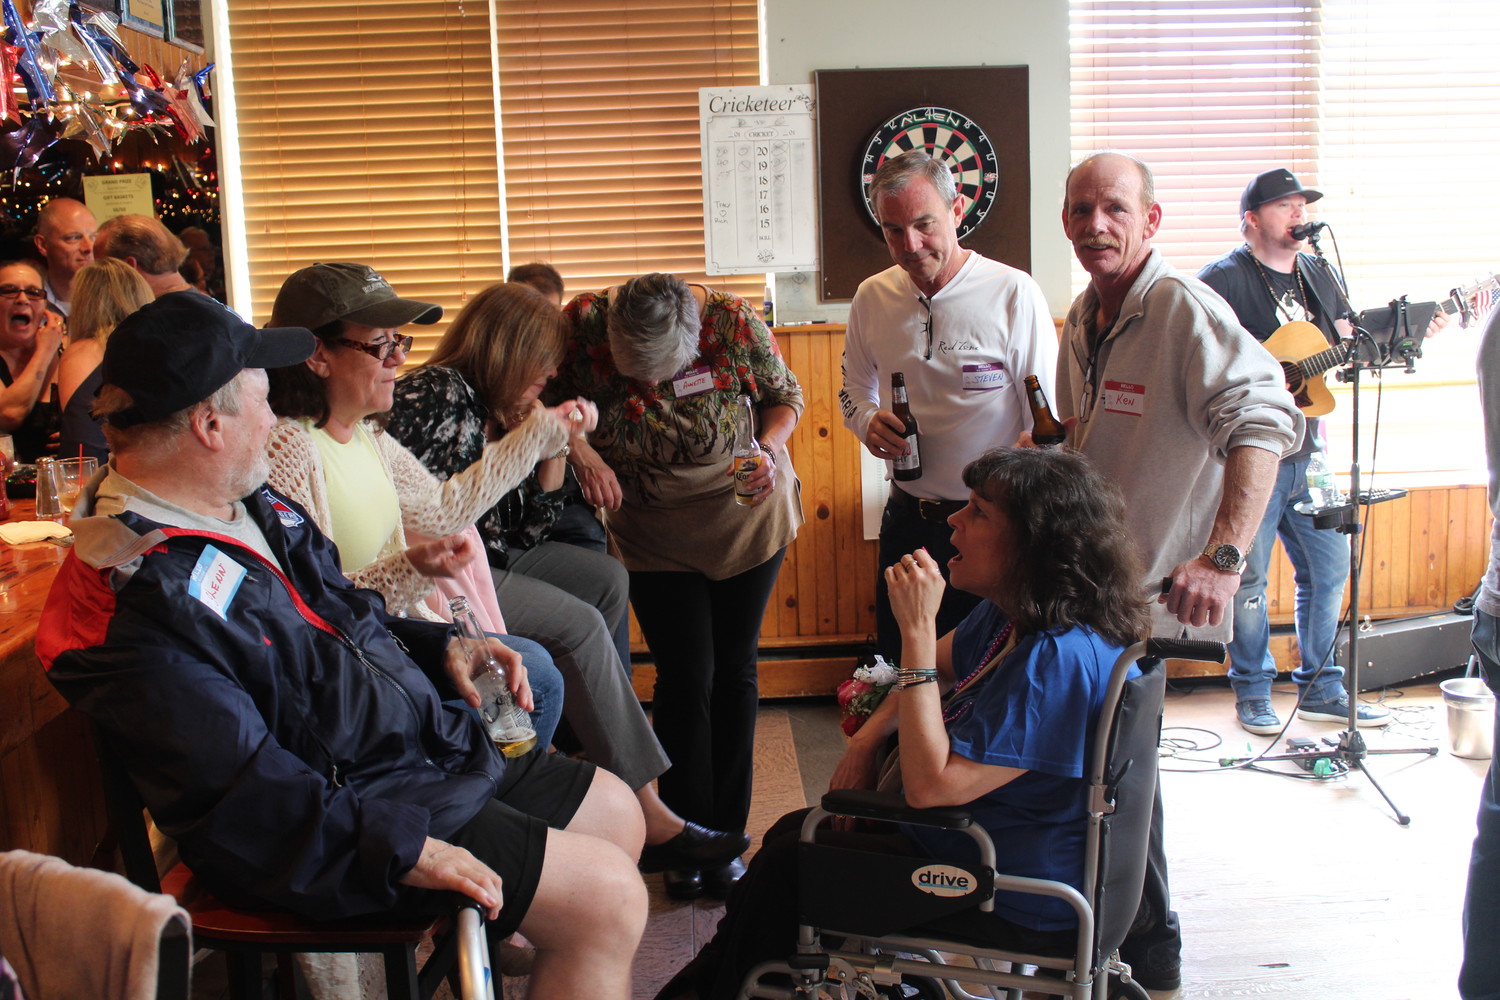 Joan Greenspan, seated at right, caught up with old friends at a June 3 fundraiser held to collect money for her purchase of a handicapped-accessible vehicle. Greenspan has multiple sclerosis and cannot leave her home without assistance.